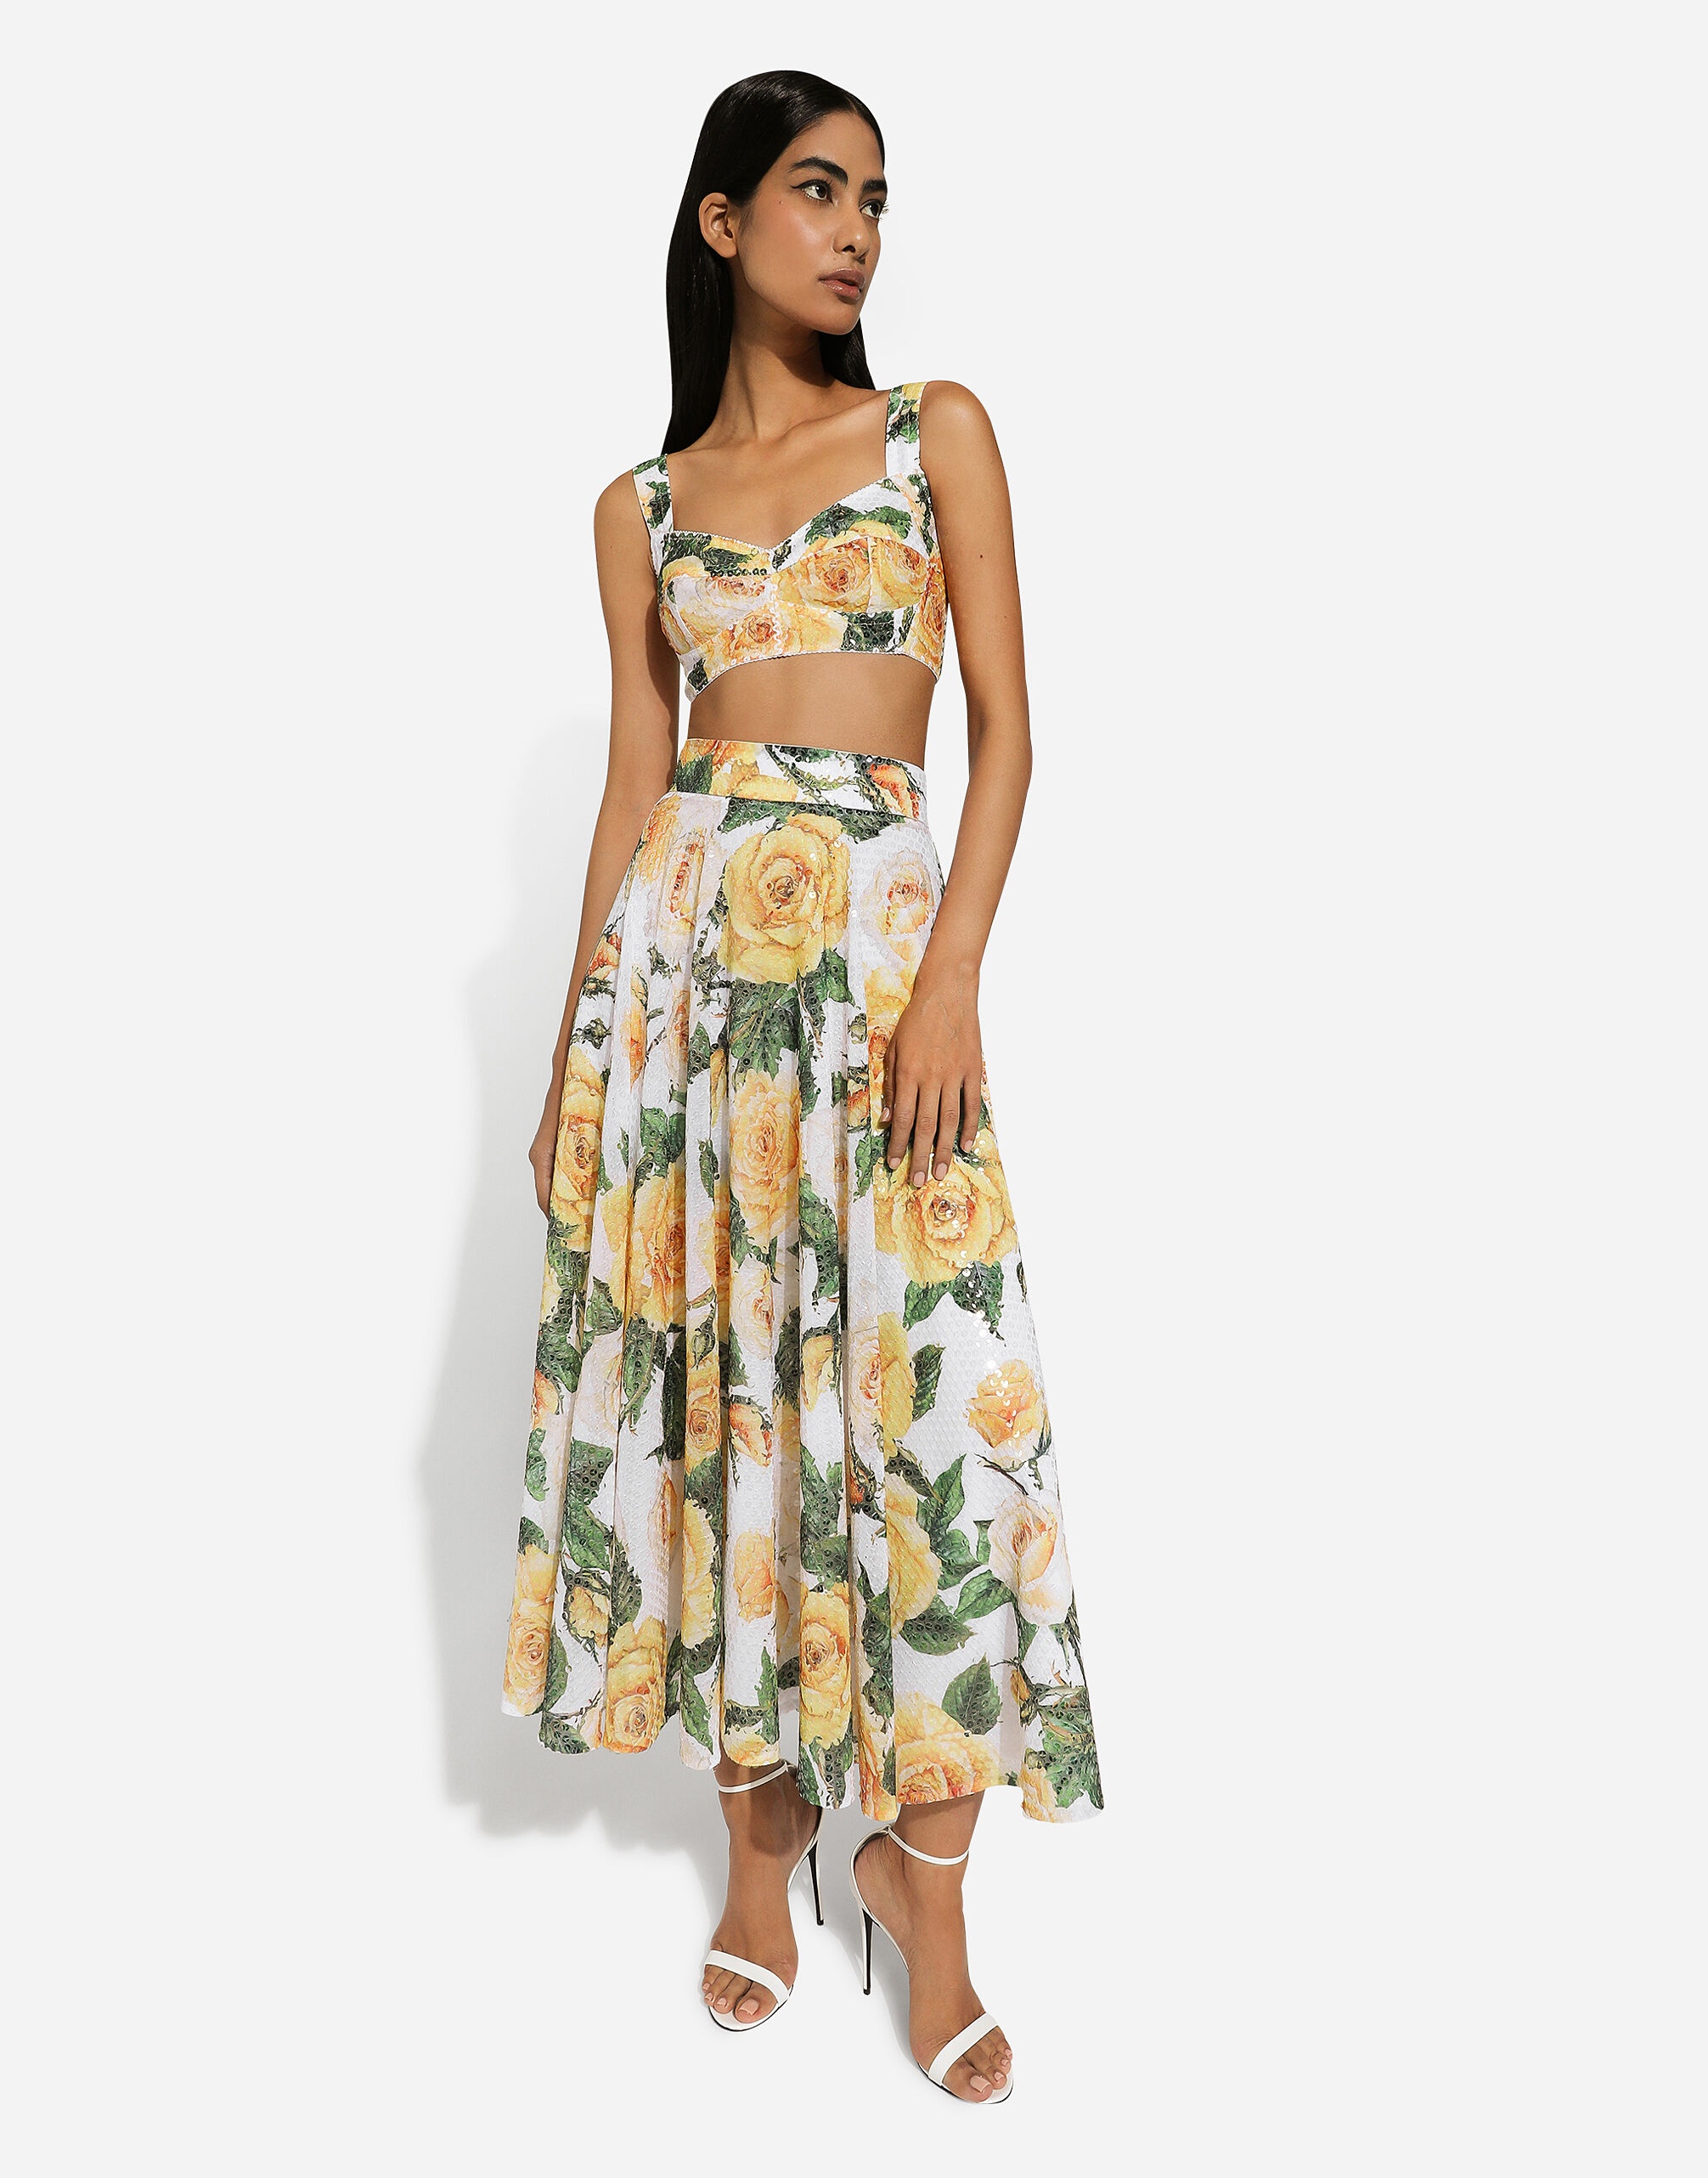 Sequined midi circle skirt with yellow rose print - 5